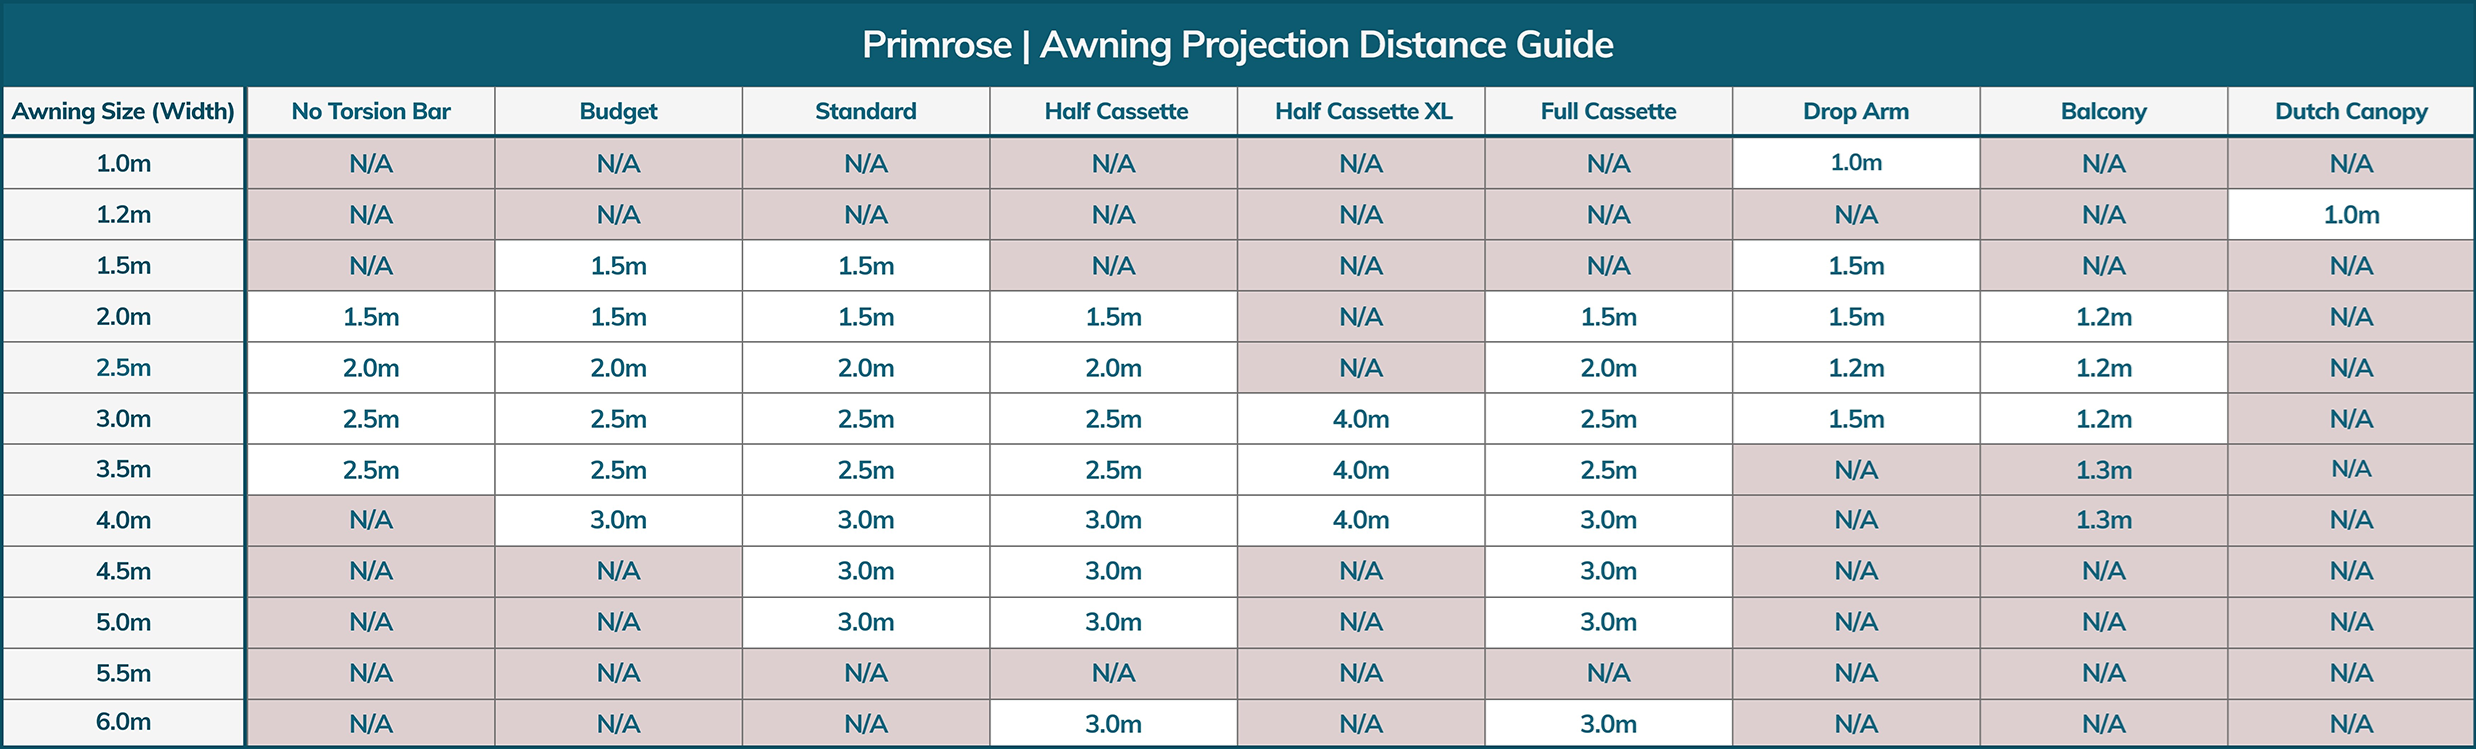 Awning Projection Distance Guide